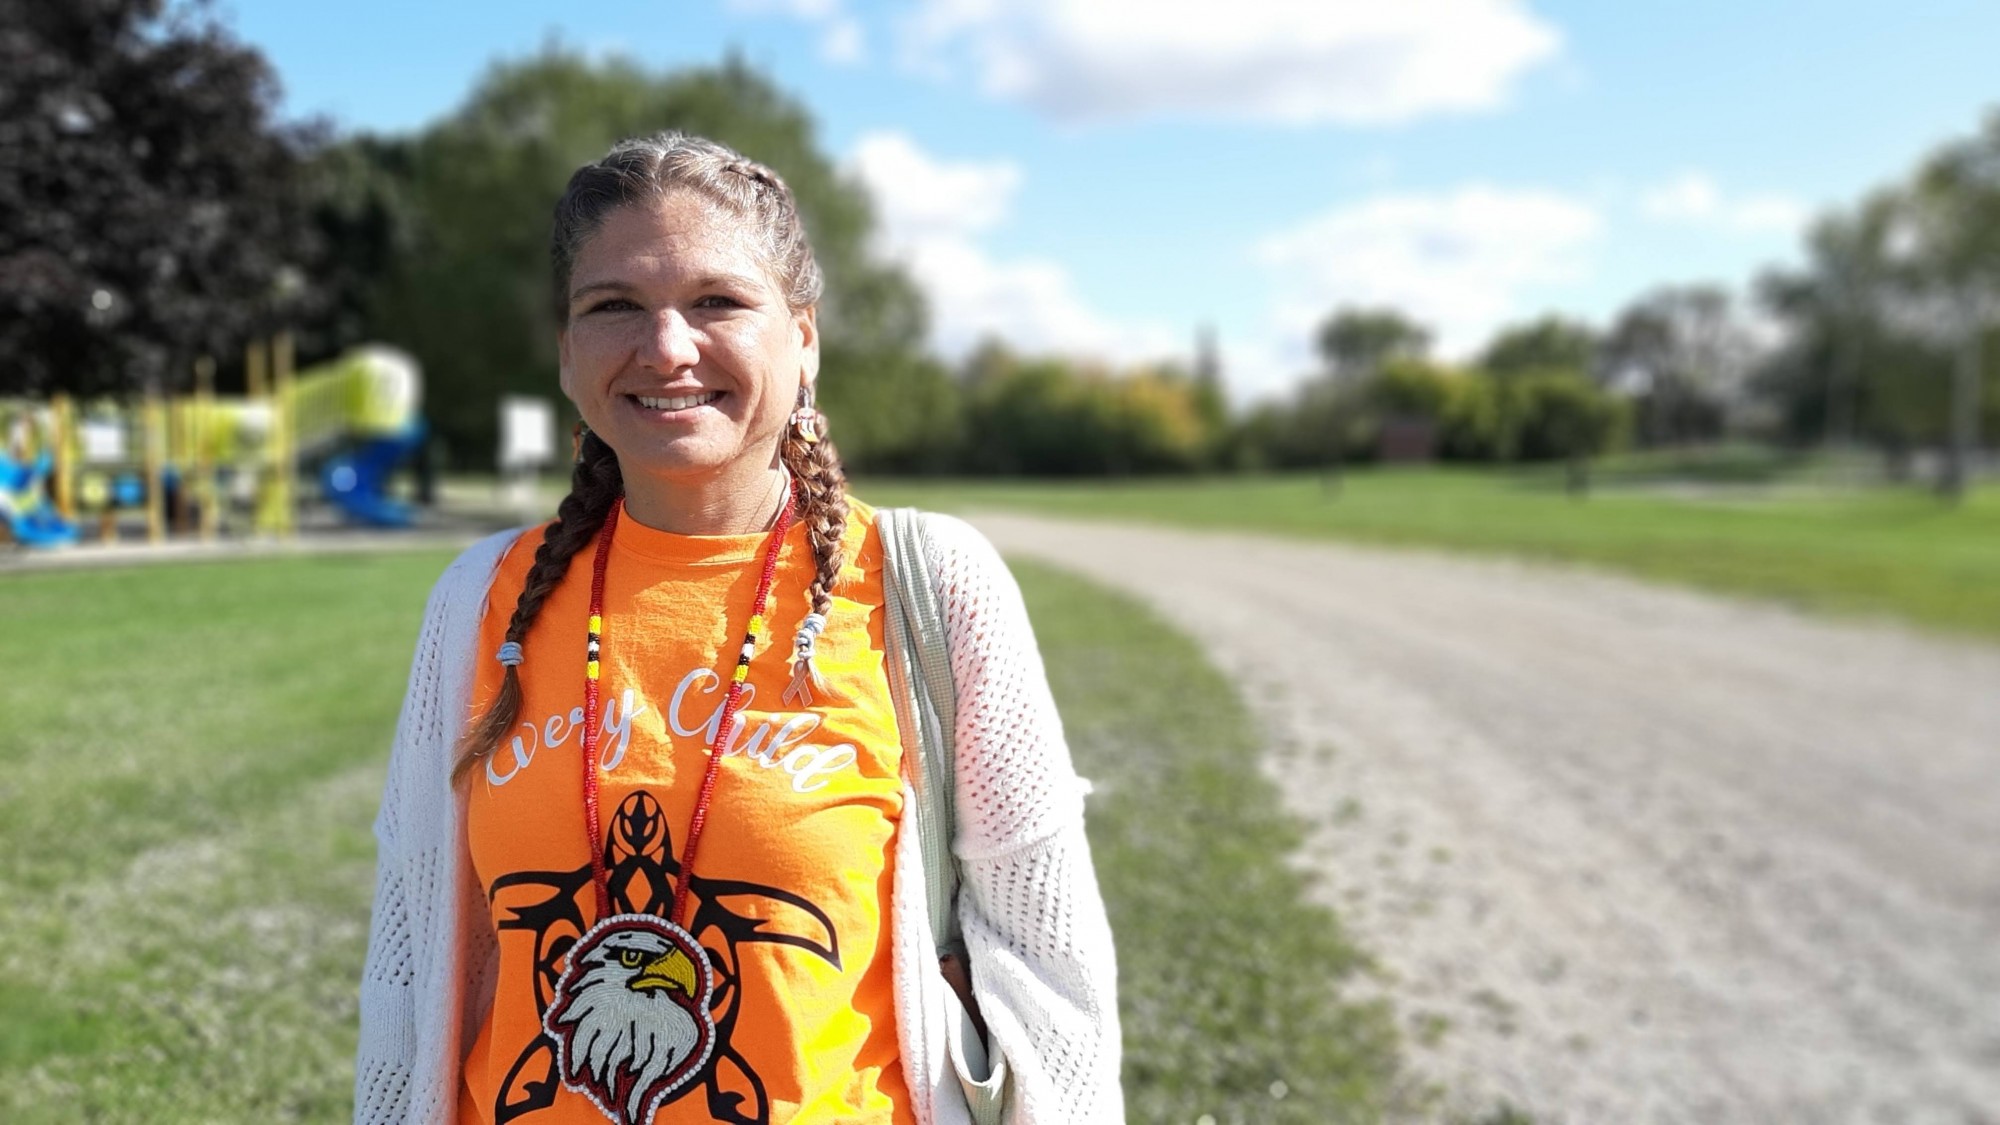 Kelly Welch (Muskwa Migizi Kwe) accepted community donations on behalf of Crow Shield Lodge. “I’m Anishinaabe Ojibway, with British and Irish ancestry as well. That mixed ancestry, to me, is reconciliation. Just existing is part of that reconciliation.”